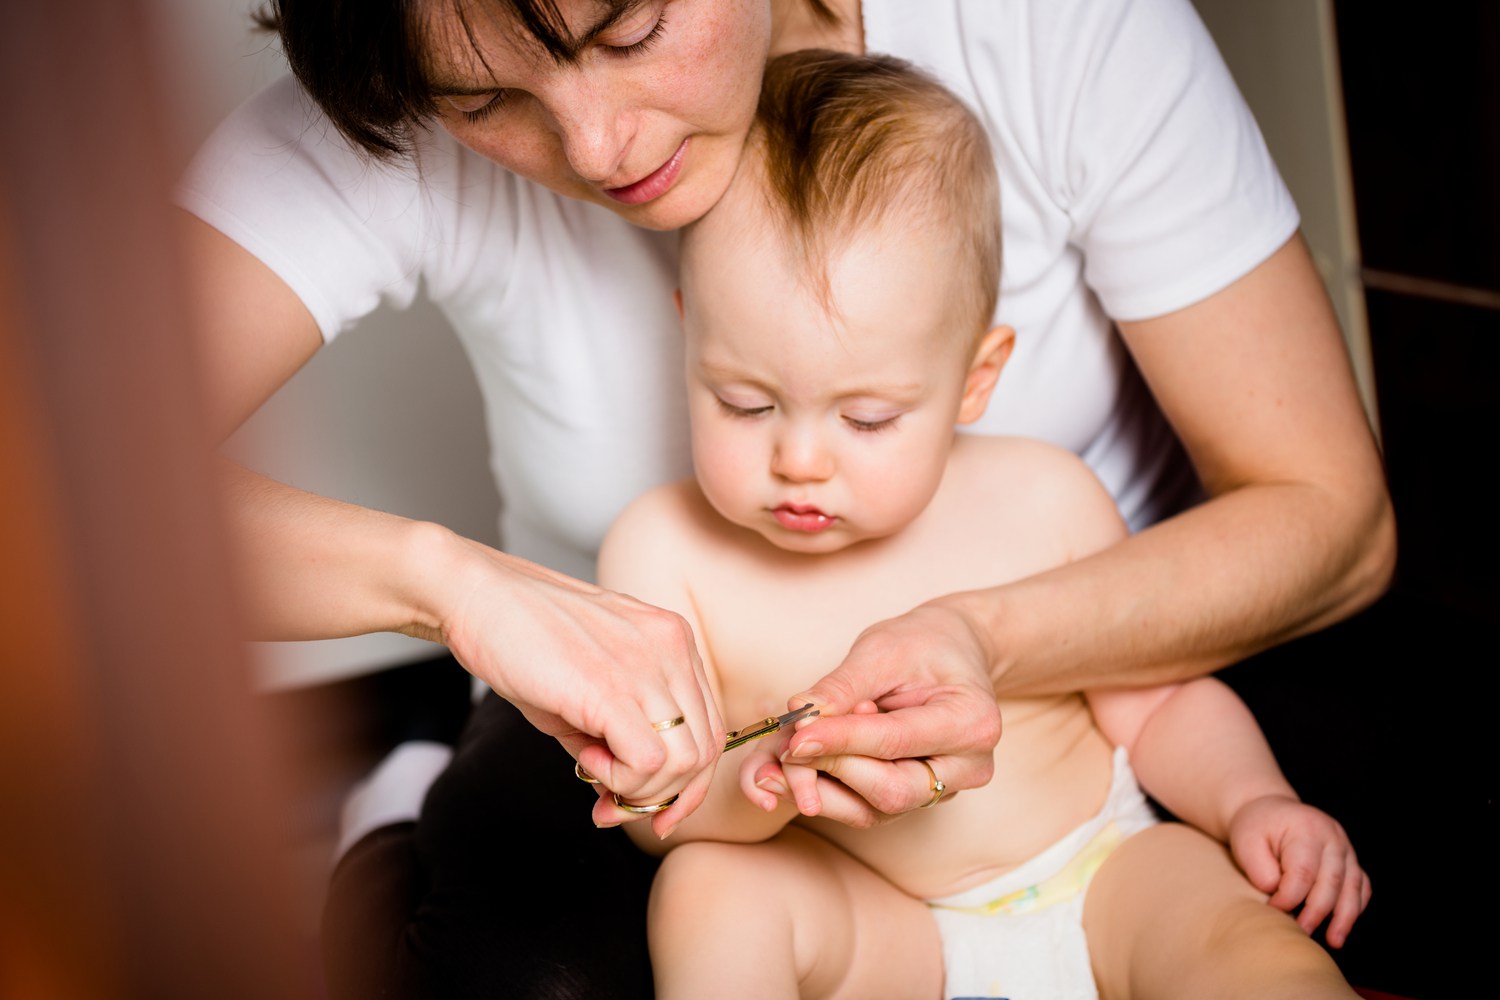 How to Cut Your Baby’s Nails Without Hurting Them